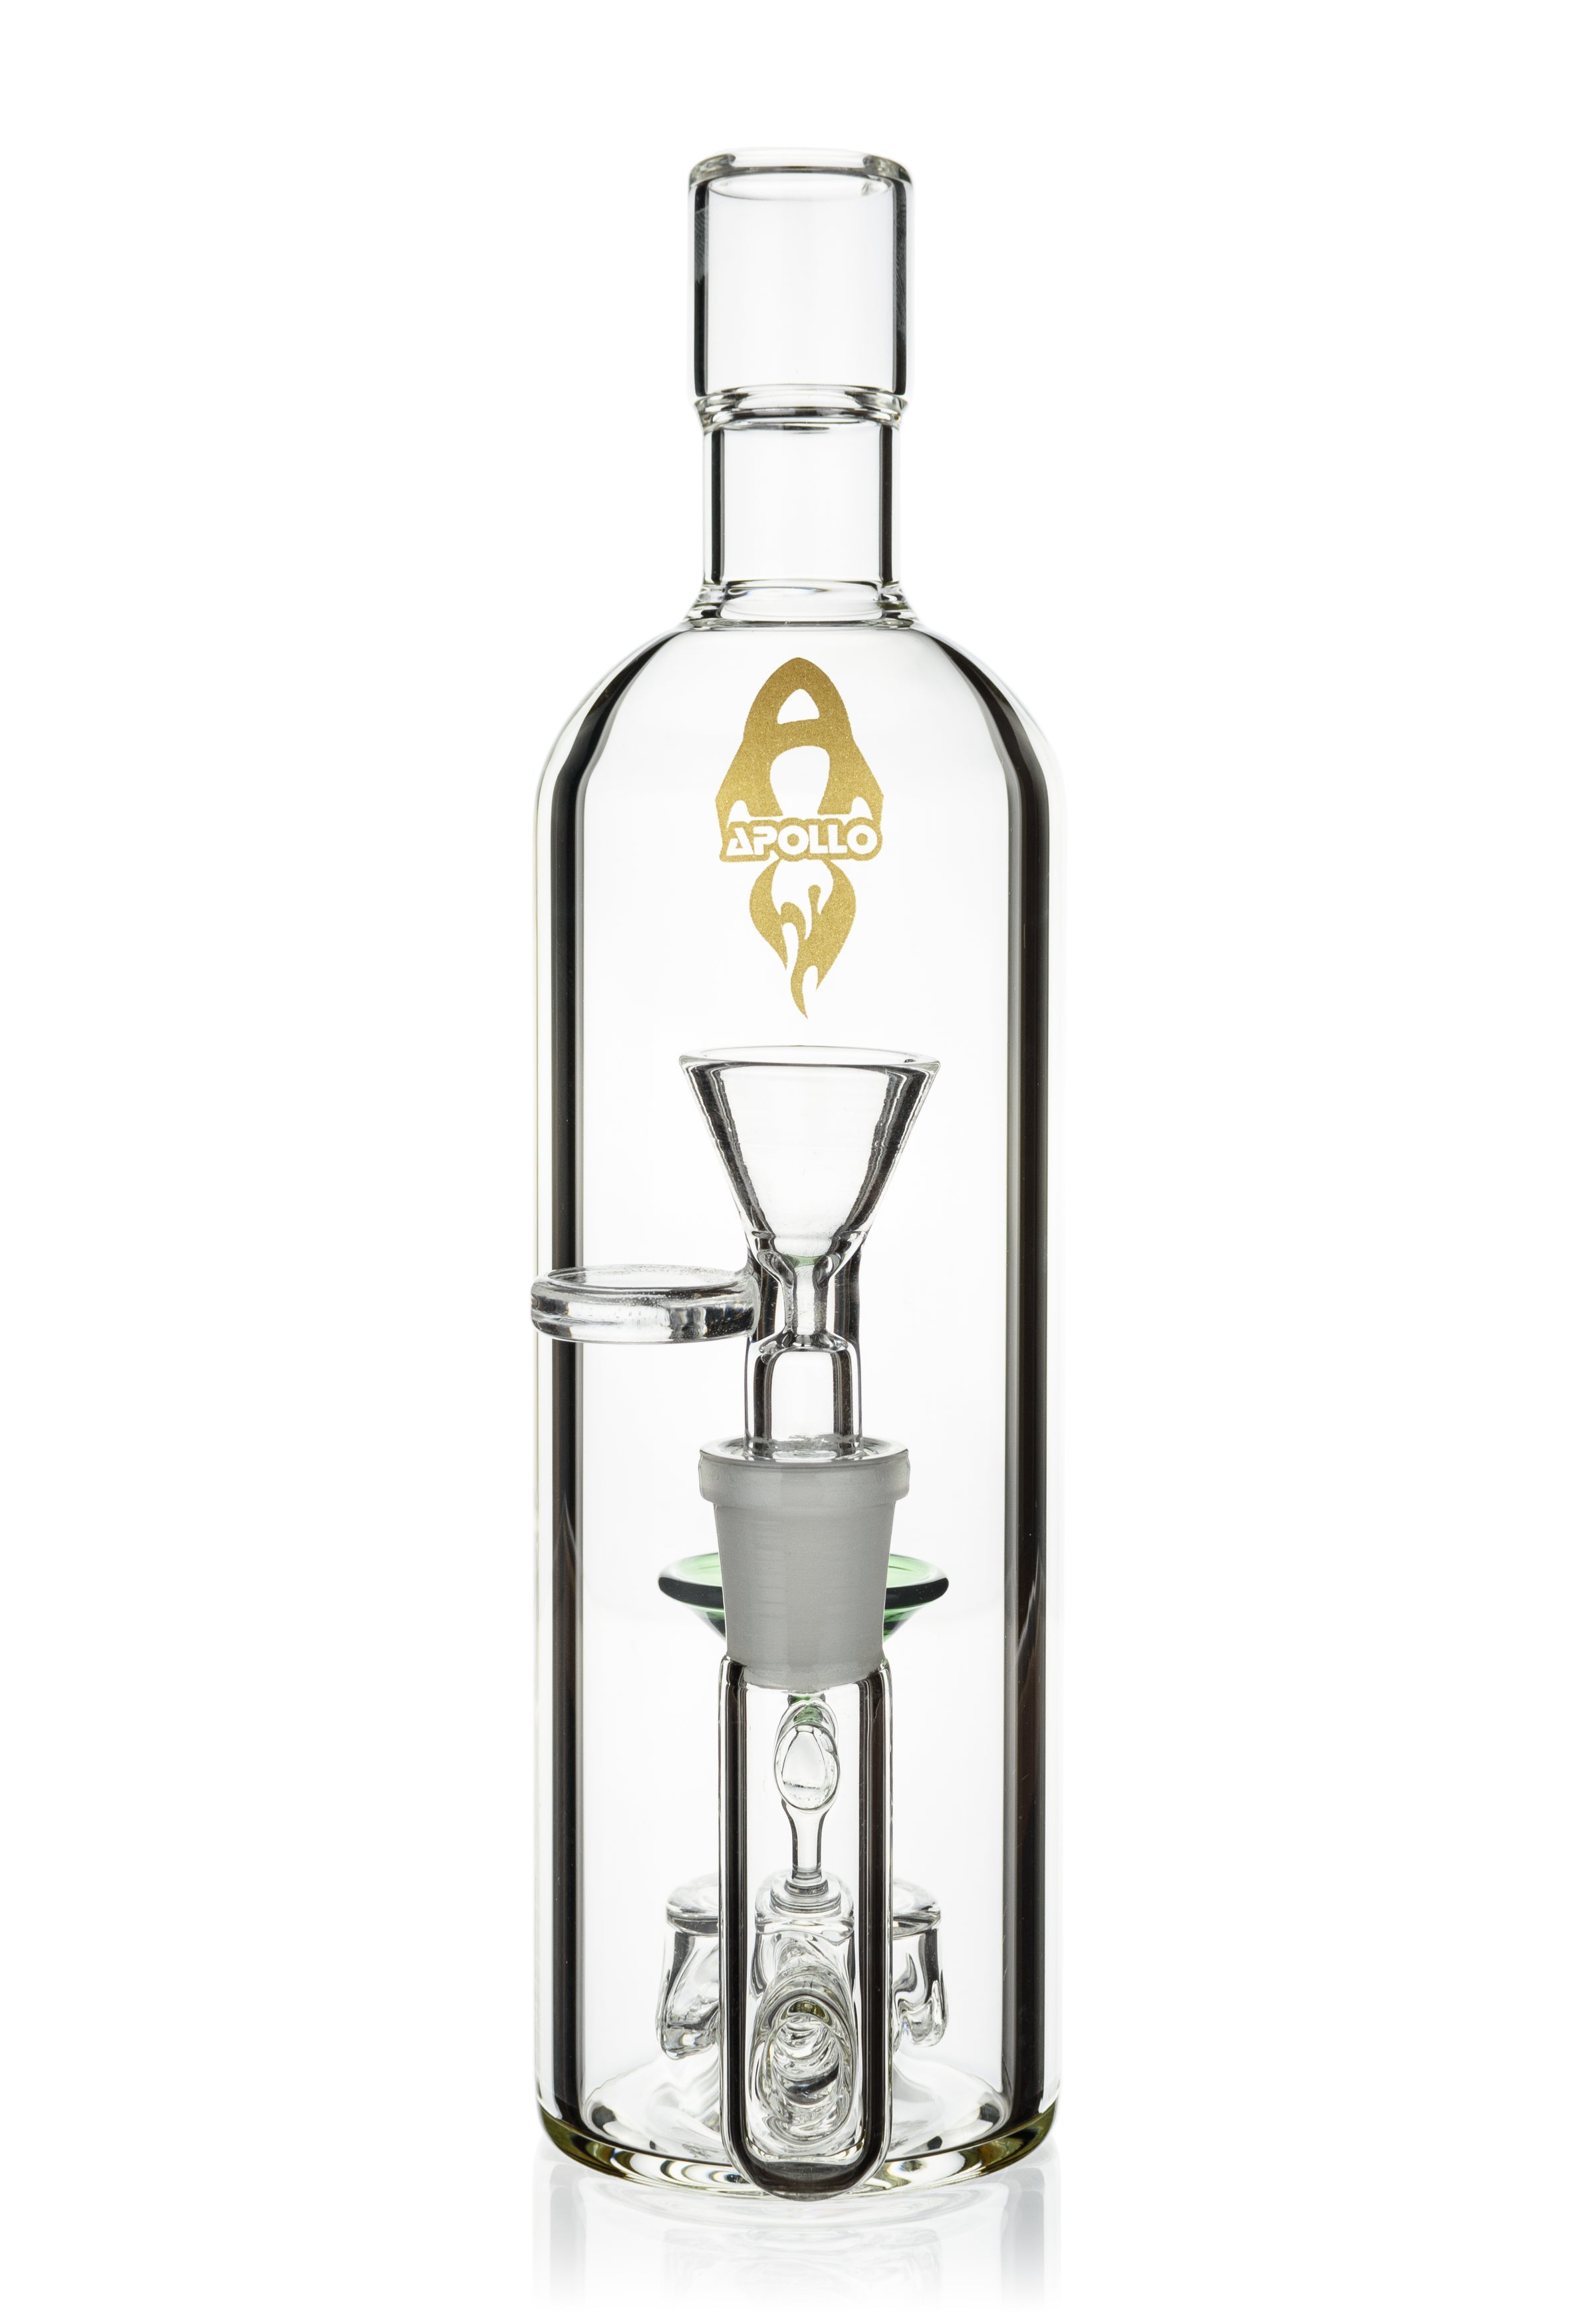 9" Bottle Rig, by Apollo (free banger included) - Bat Kountry